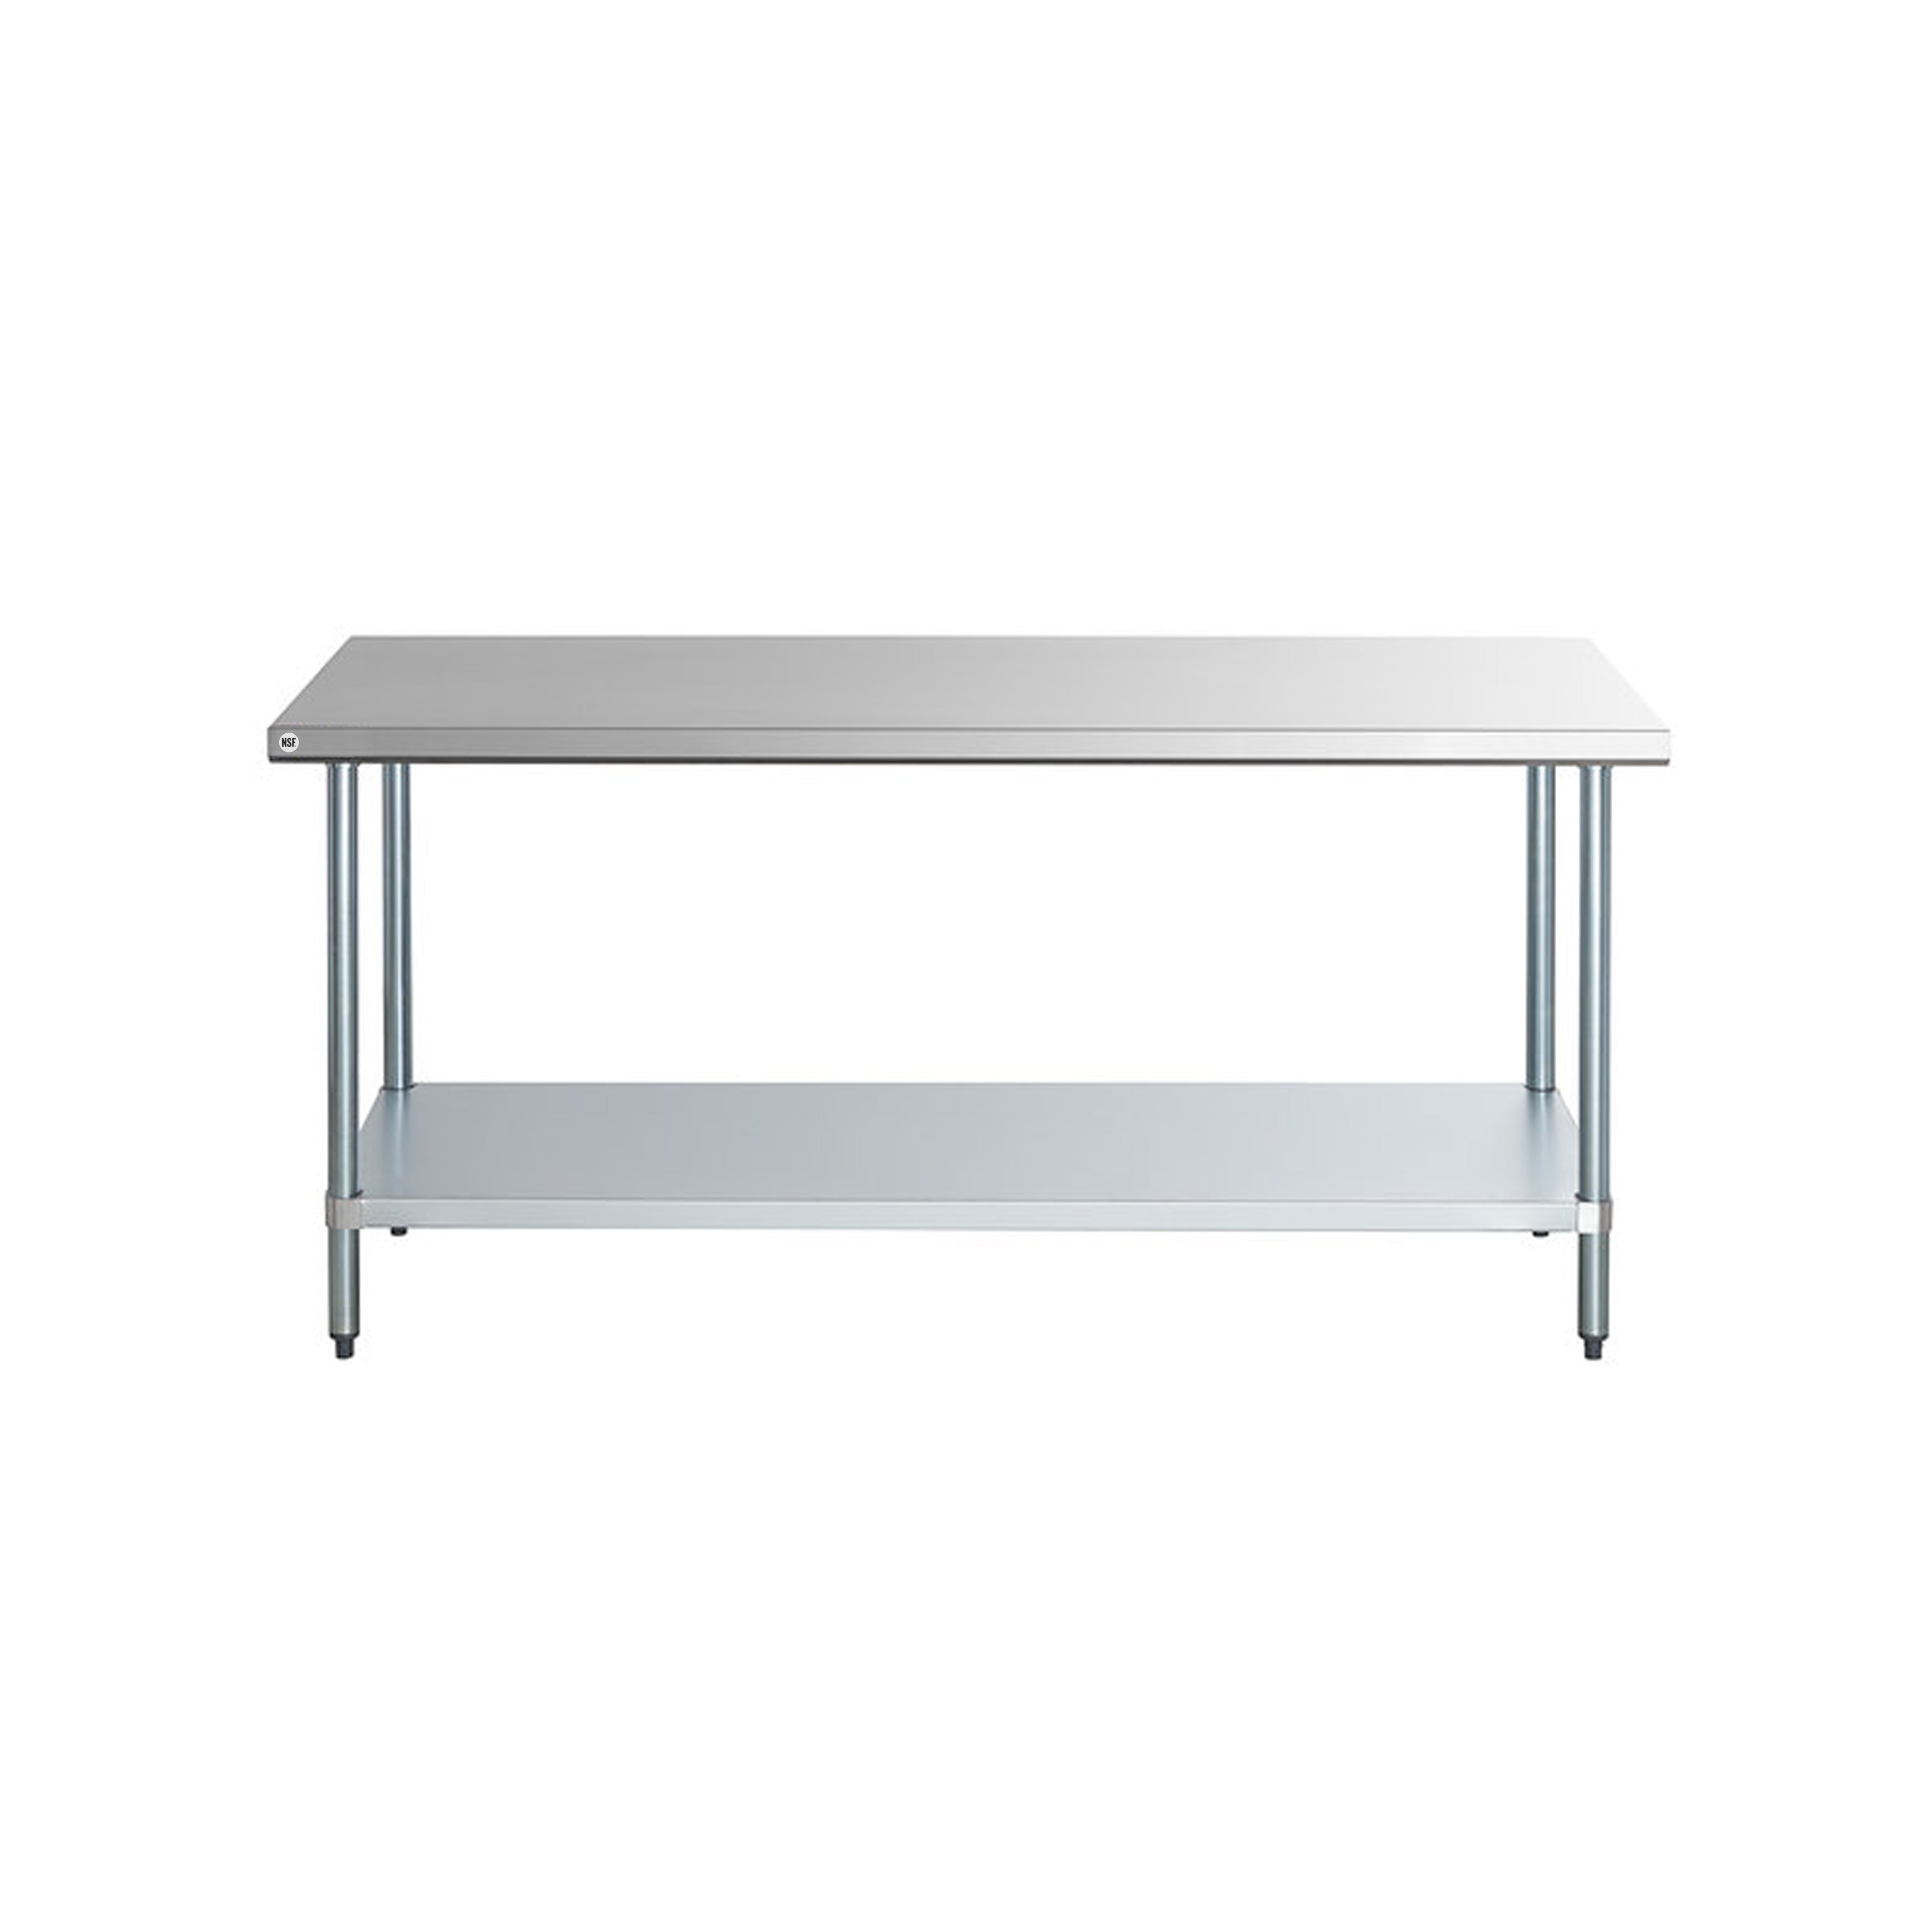 Omcan - 19138, Commercial 24" x 48" Stainless Steel Kitchen Work Table 1000lbs Heavy Duty